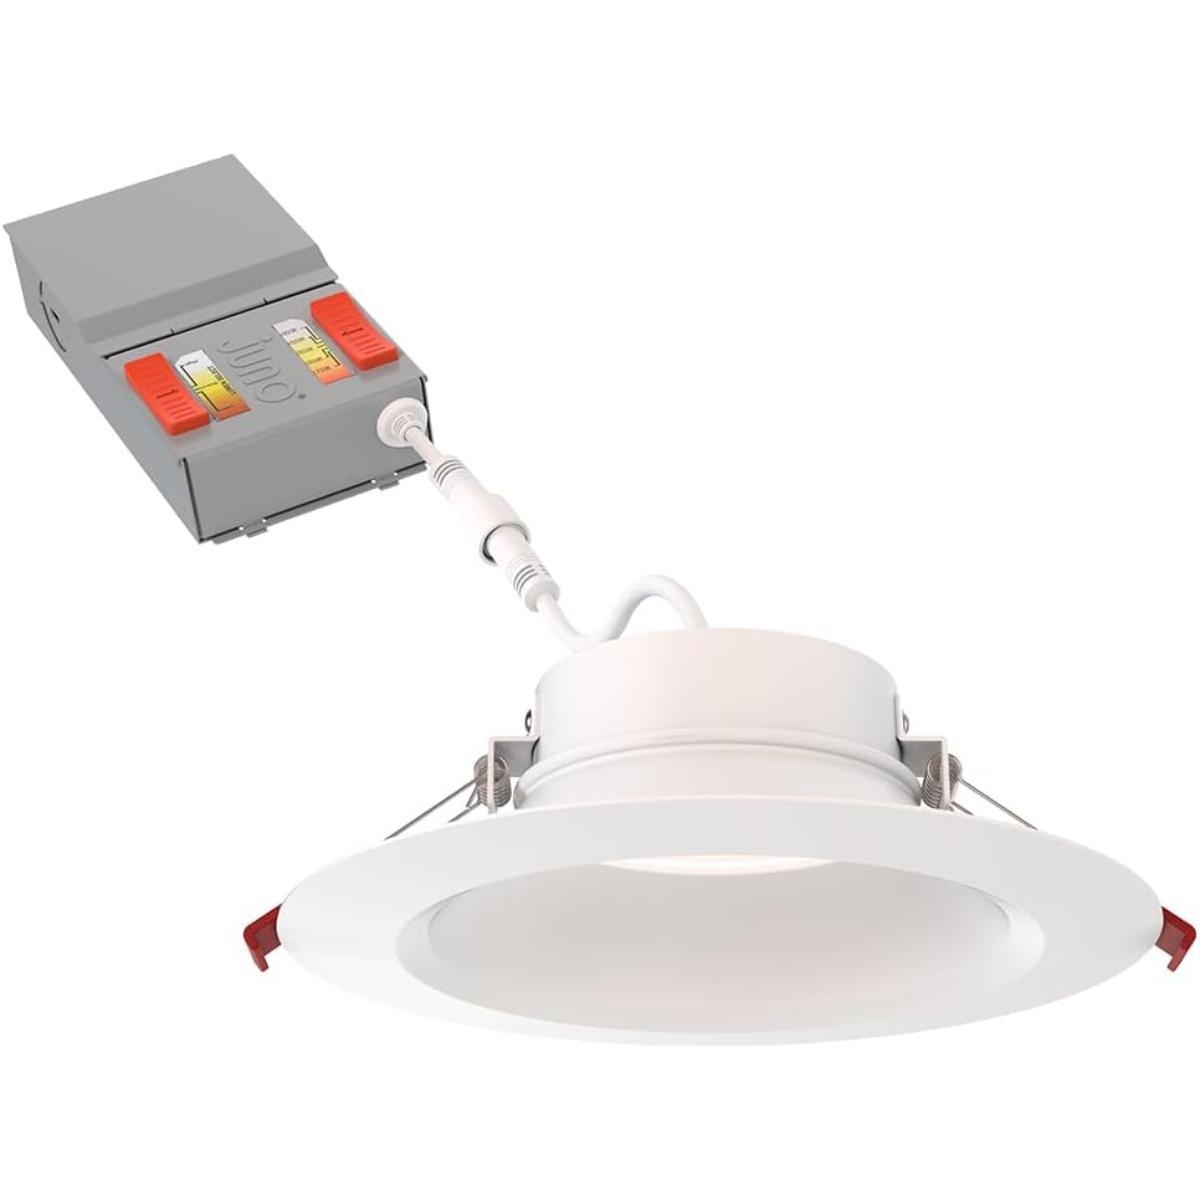 6 inch Wafer Canless LED Recessed Light, 16 Watt, 1300 Lumens, Selectable CCT, 2700K to 5000K, Smooth Trim